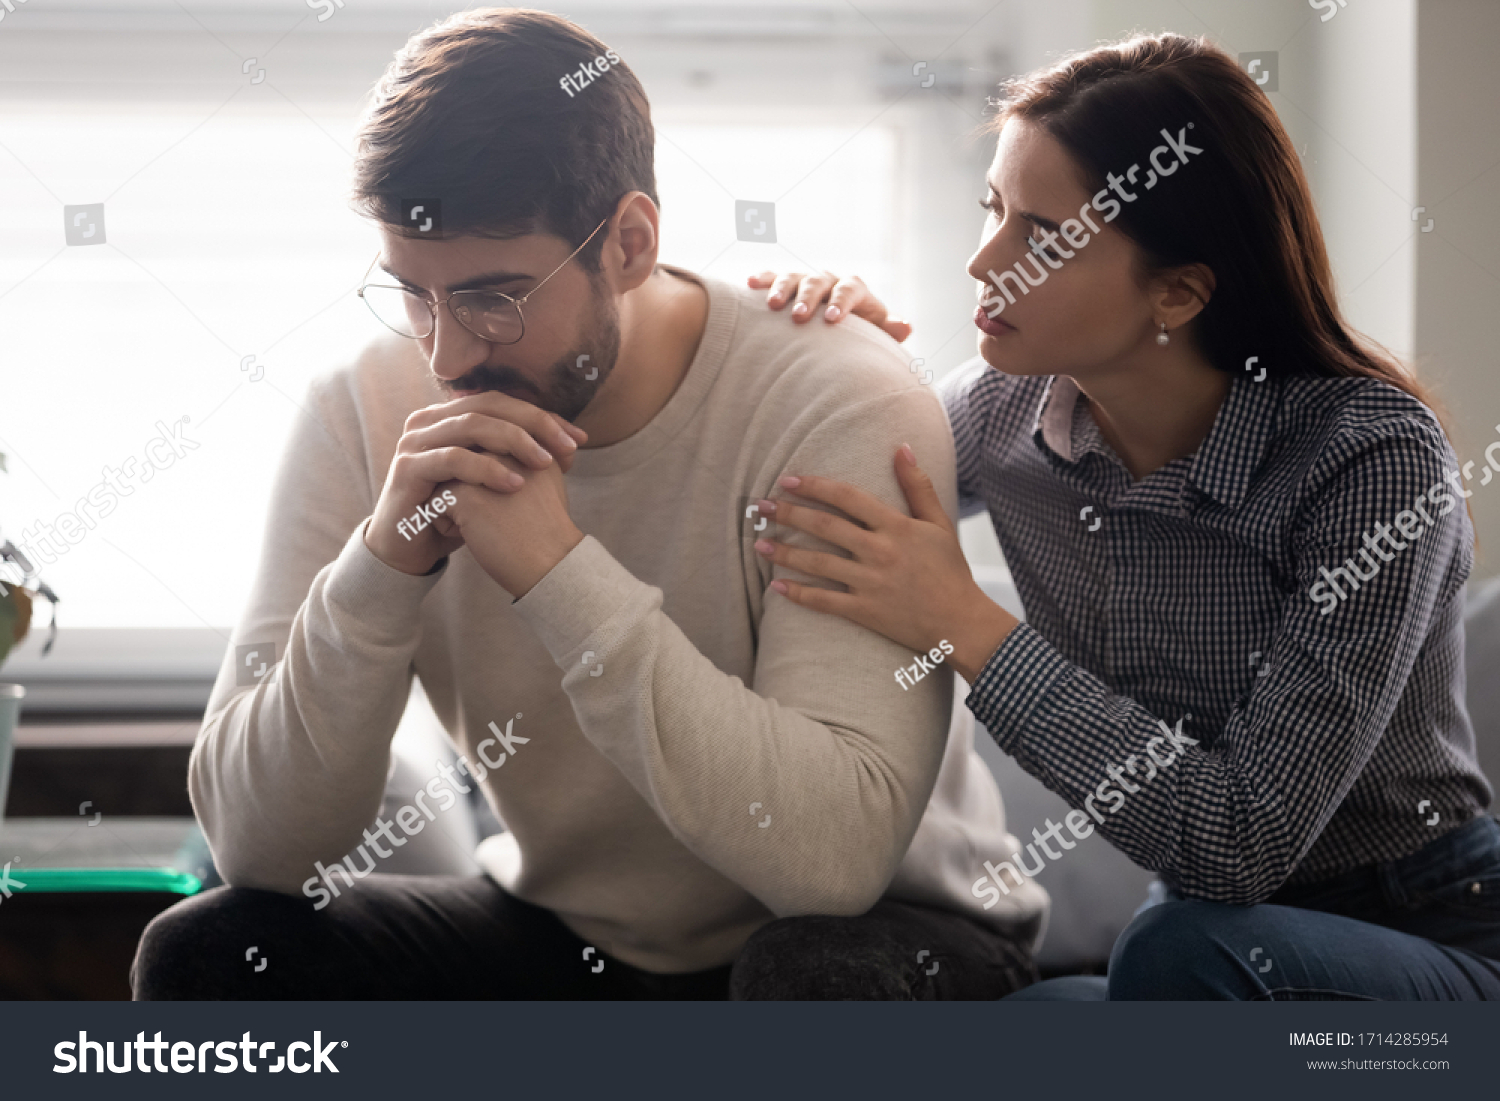 Attractive wife comforting husband embrace and showing support. Woman upset man, expressing sympathy and understanding, say sorry, family sitting on comfortable sofa at home. #1714285954